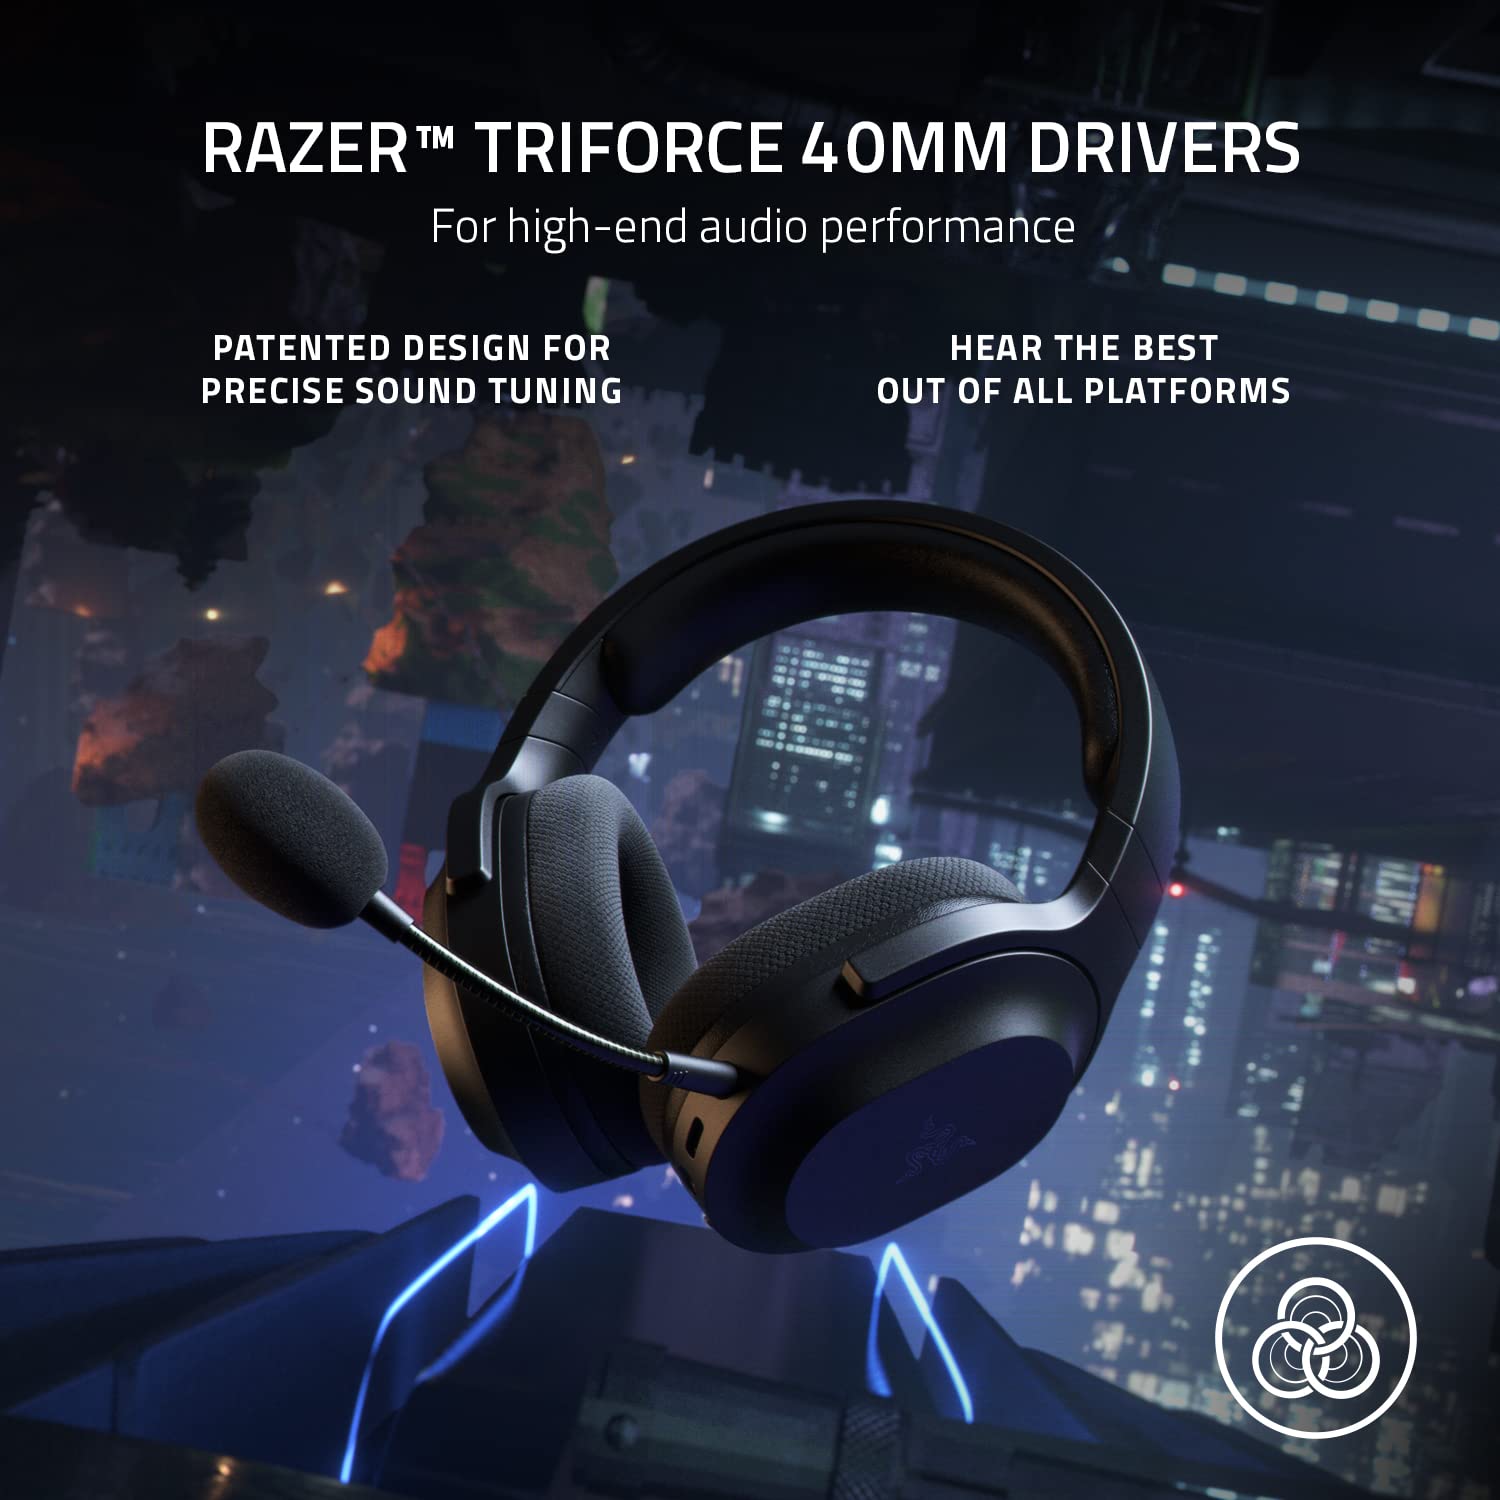 Razer Barracuda X Wireless Multi-Platform Gaming and Mobile Headset: 250g Ergonomic Design - Triforce HyperClear Cardioid Mic - On-Headset Controls - 20hrs Battery Life with USB-C Charging